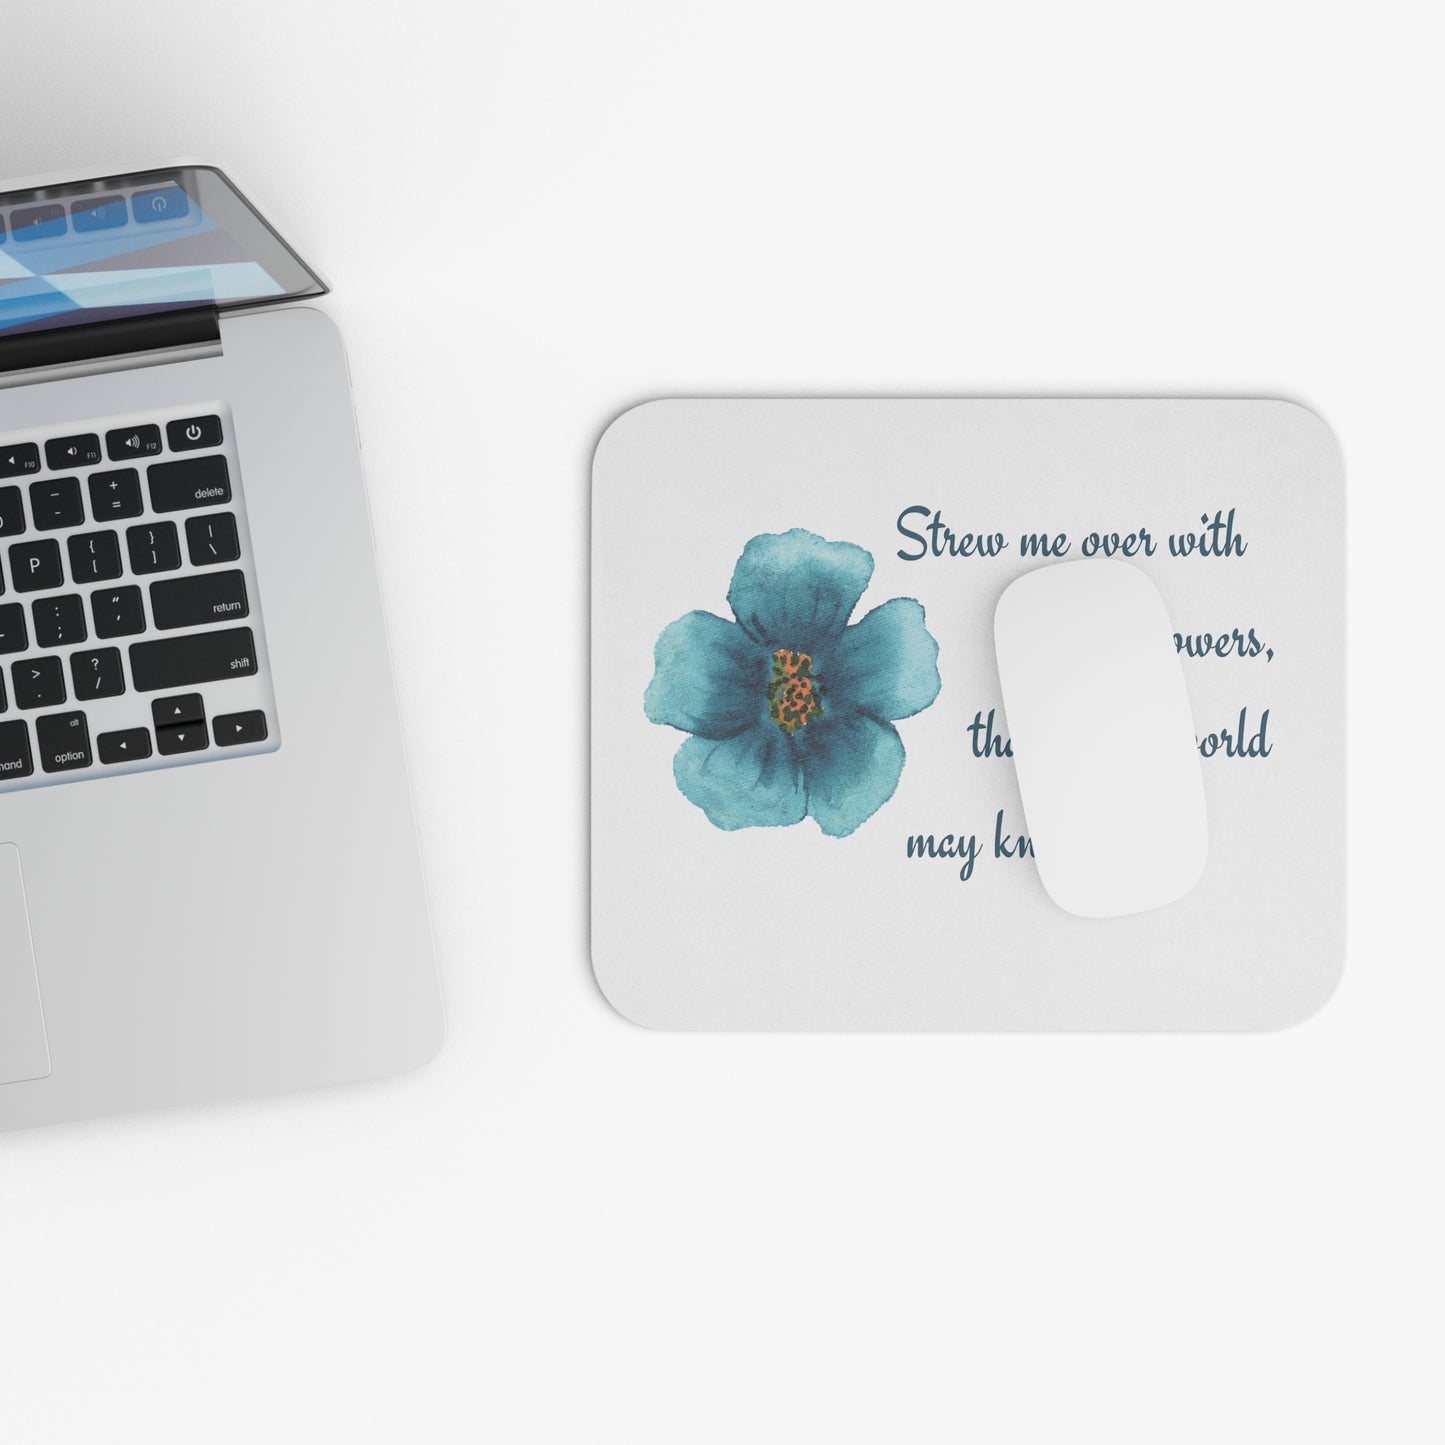 Strew Me Over With Maiden Flowers Mouse Pad for Shakespeare Lovers